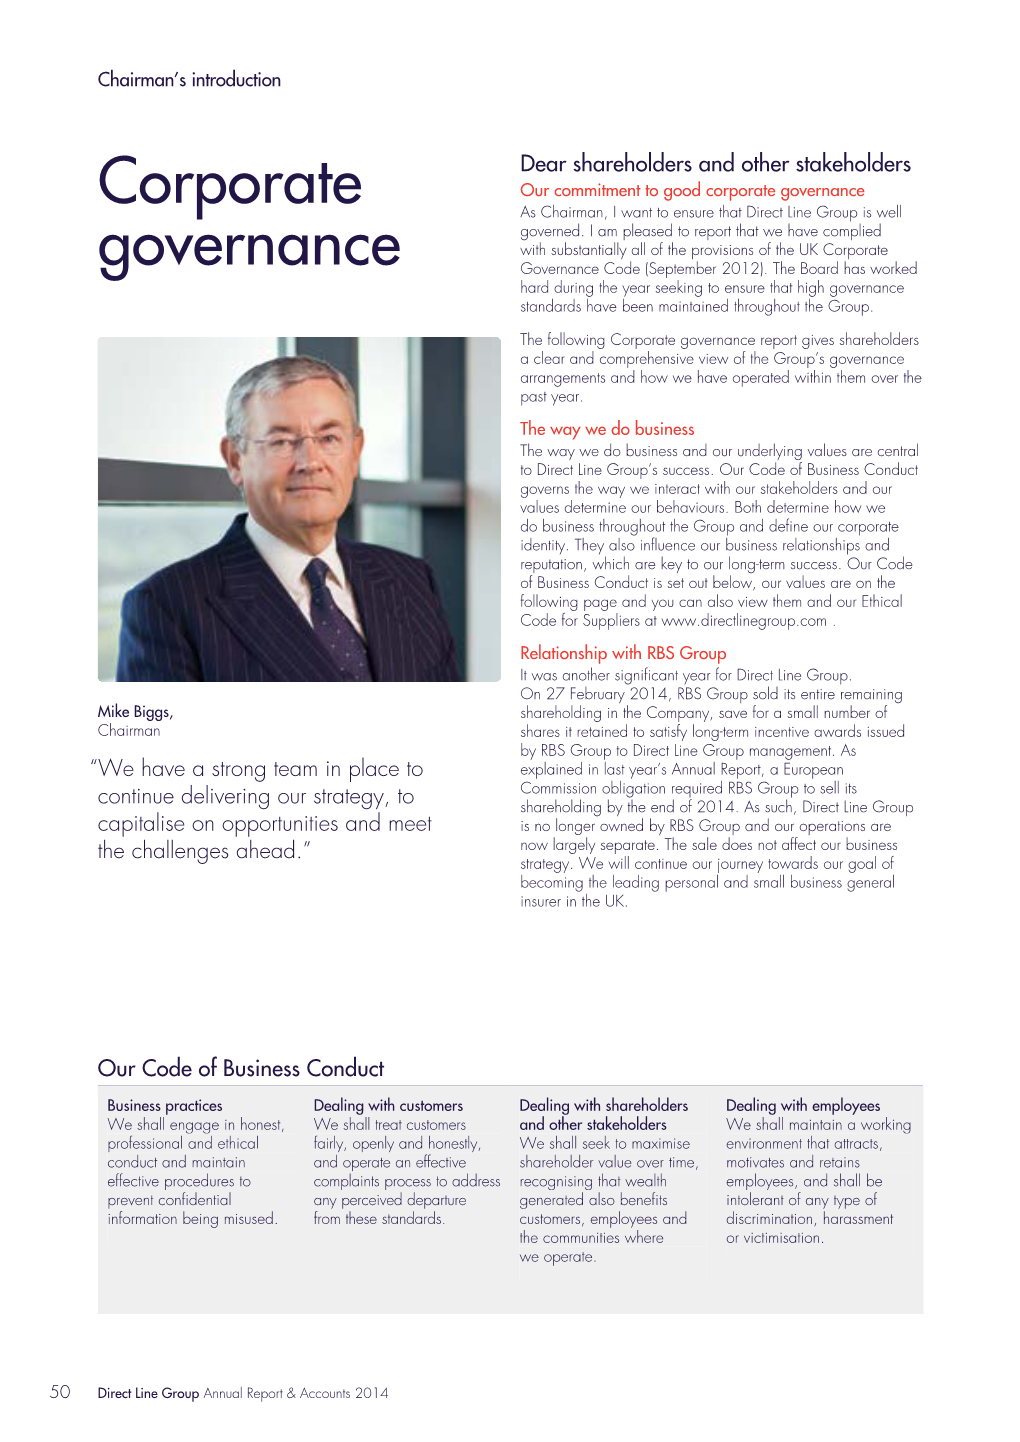 Governance Report Gives Shareholders a Clear and Comprehensive View of the Group’S Governance Arrangements and How We Have Operated Within Them Over the Past Year